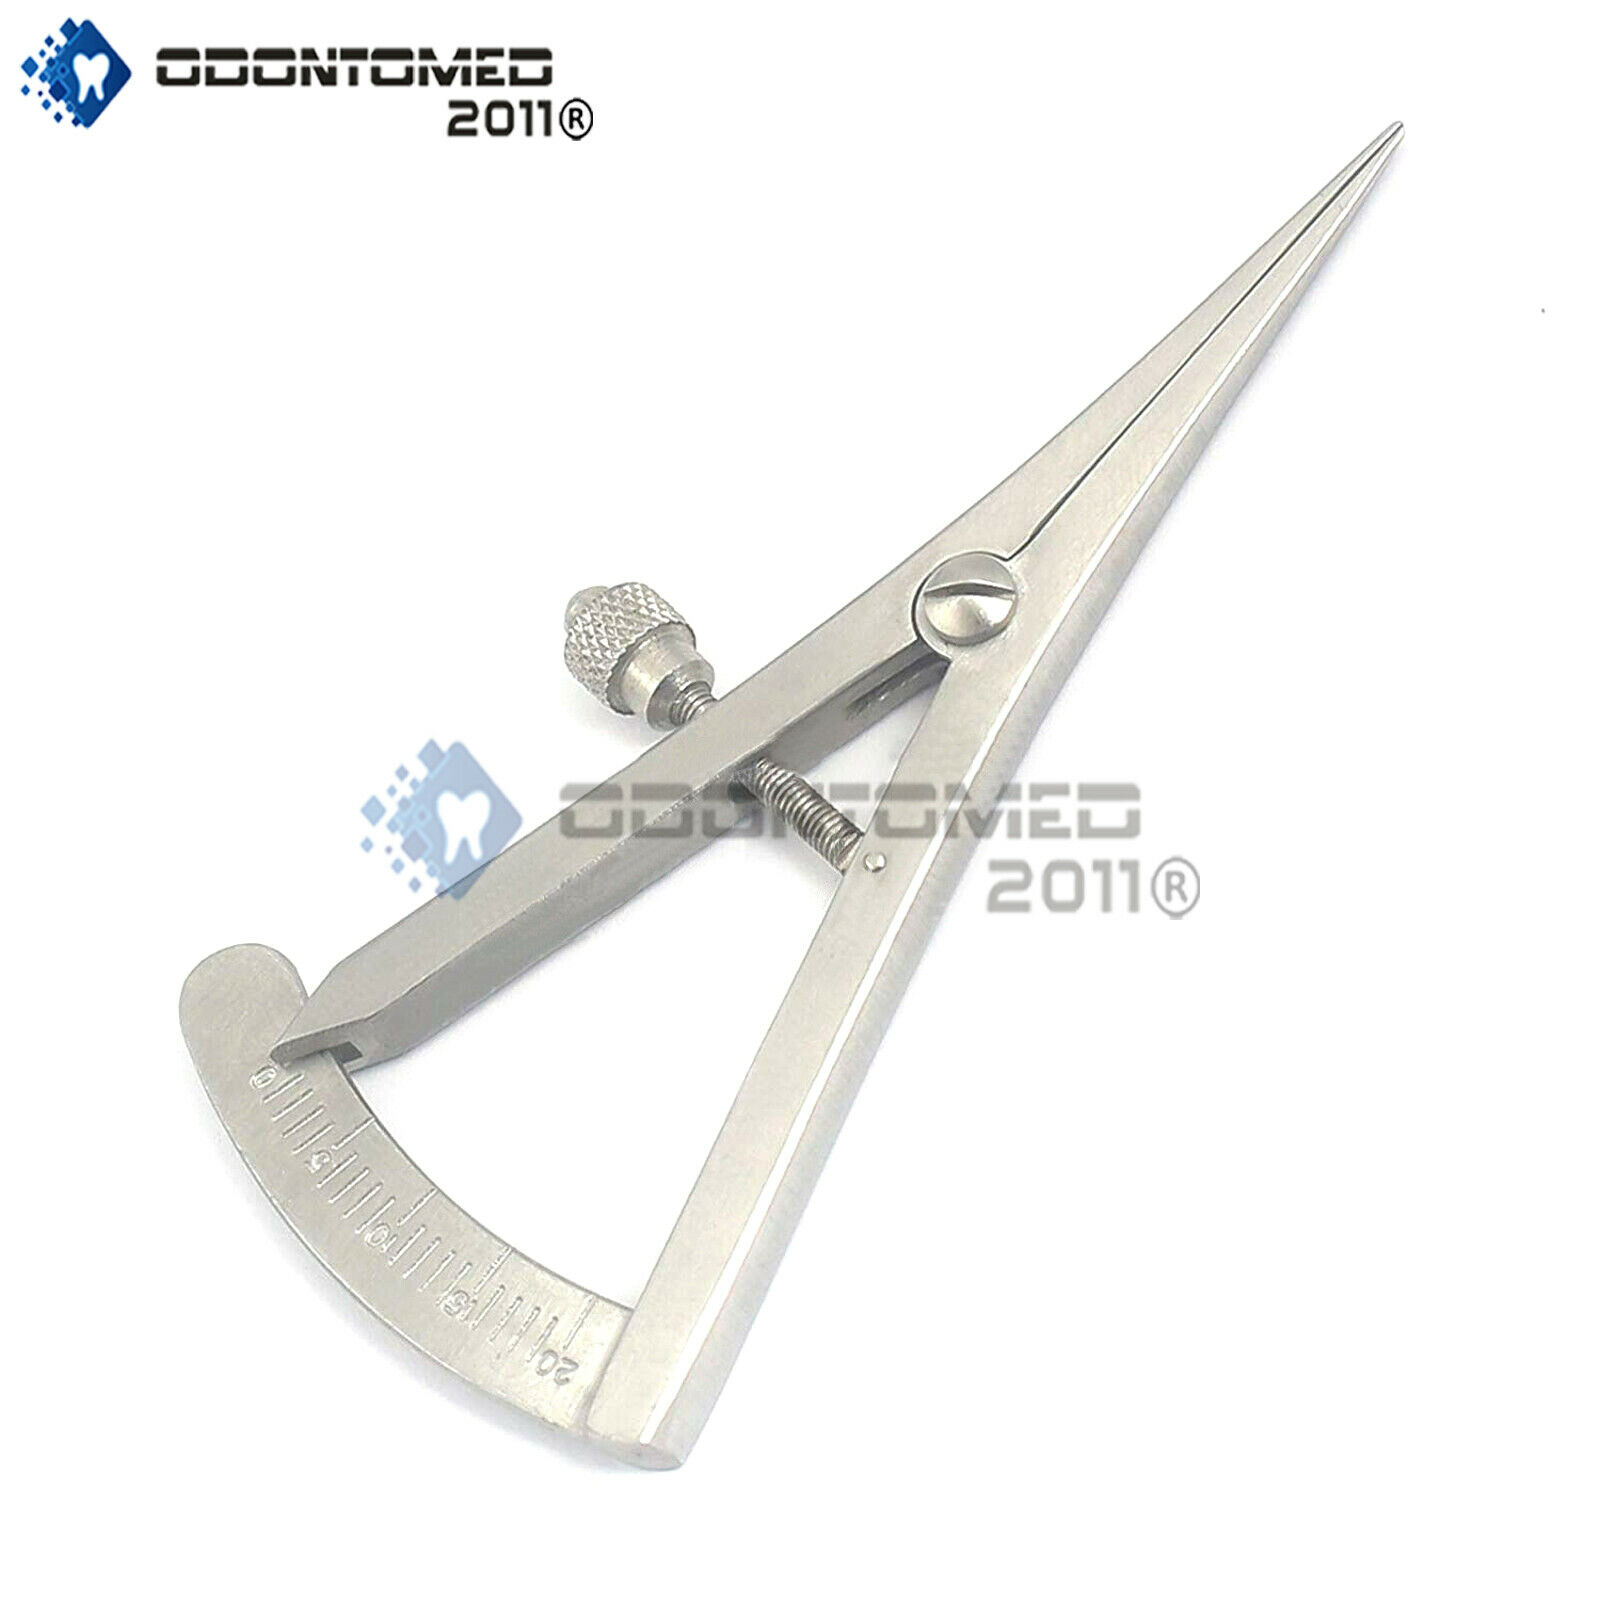 Castroviejo Caliper Surgical Dental Medical Instruments 0 To 20 Mm 3.25" (8.3cm)